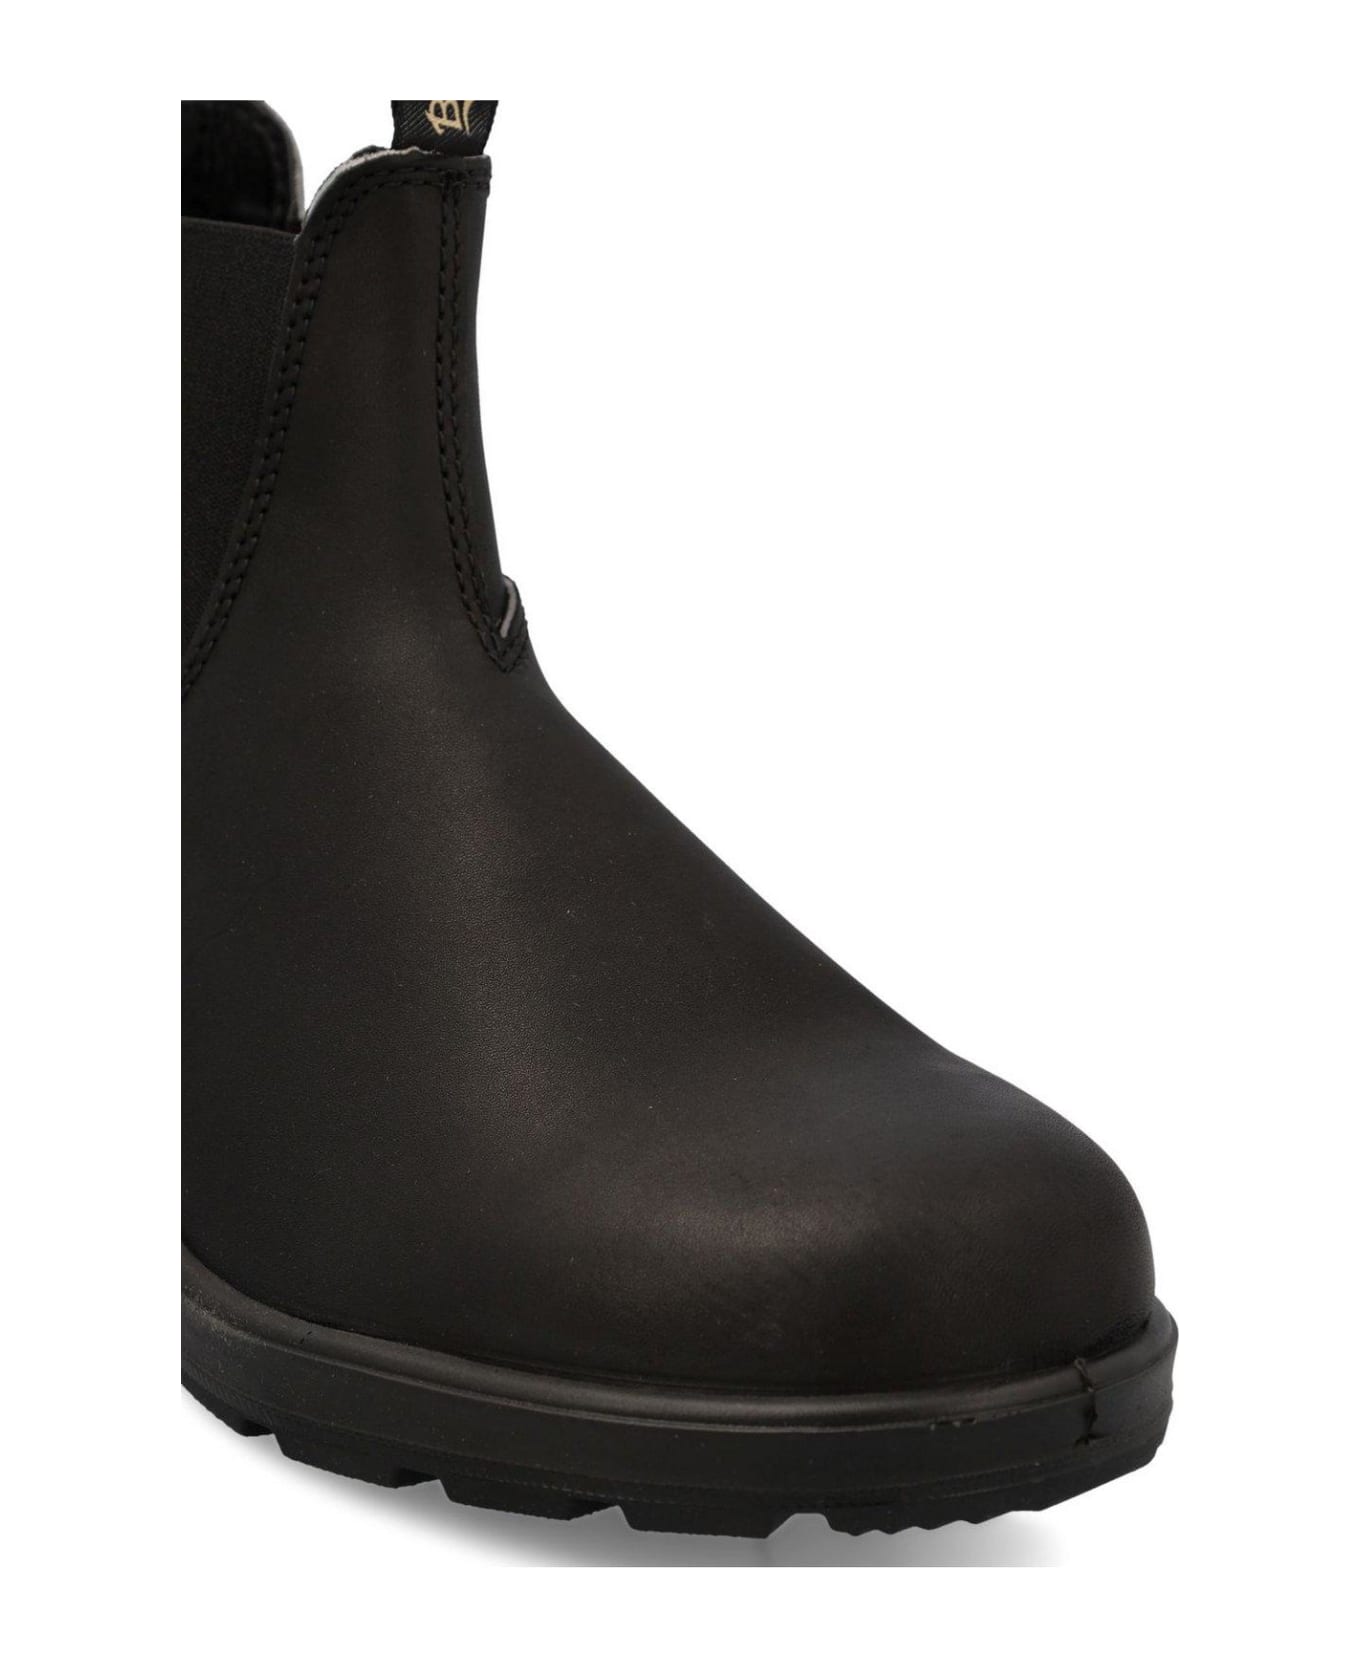 Blundstone Round-toe Ankle Boots - Black name:458